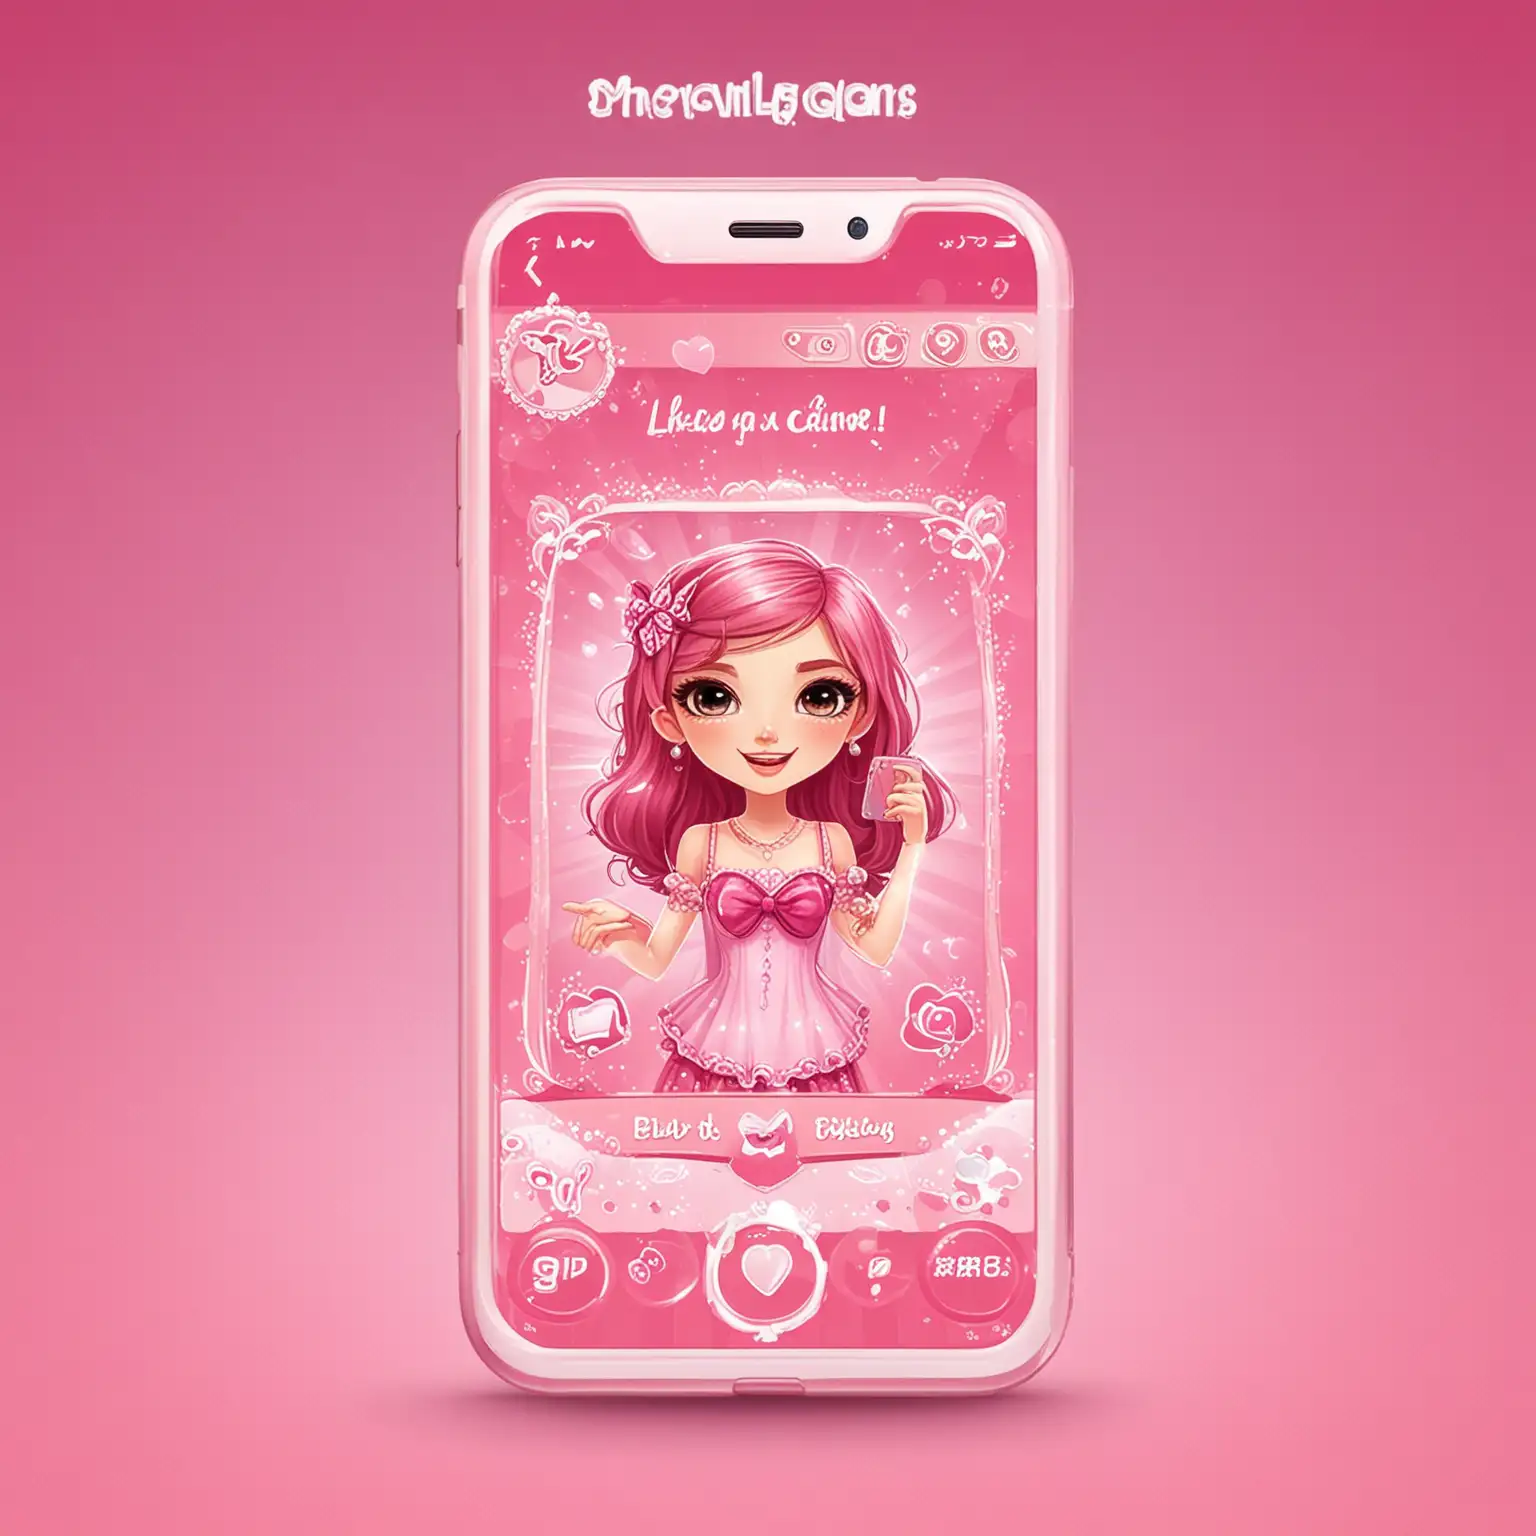 mobile phone game screen, girly game
